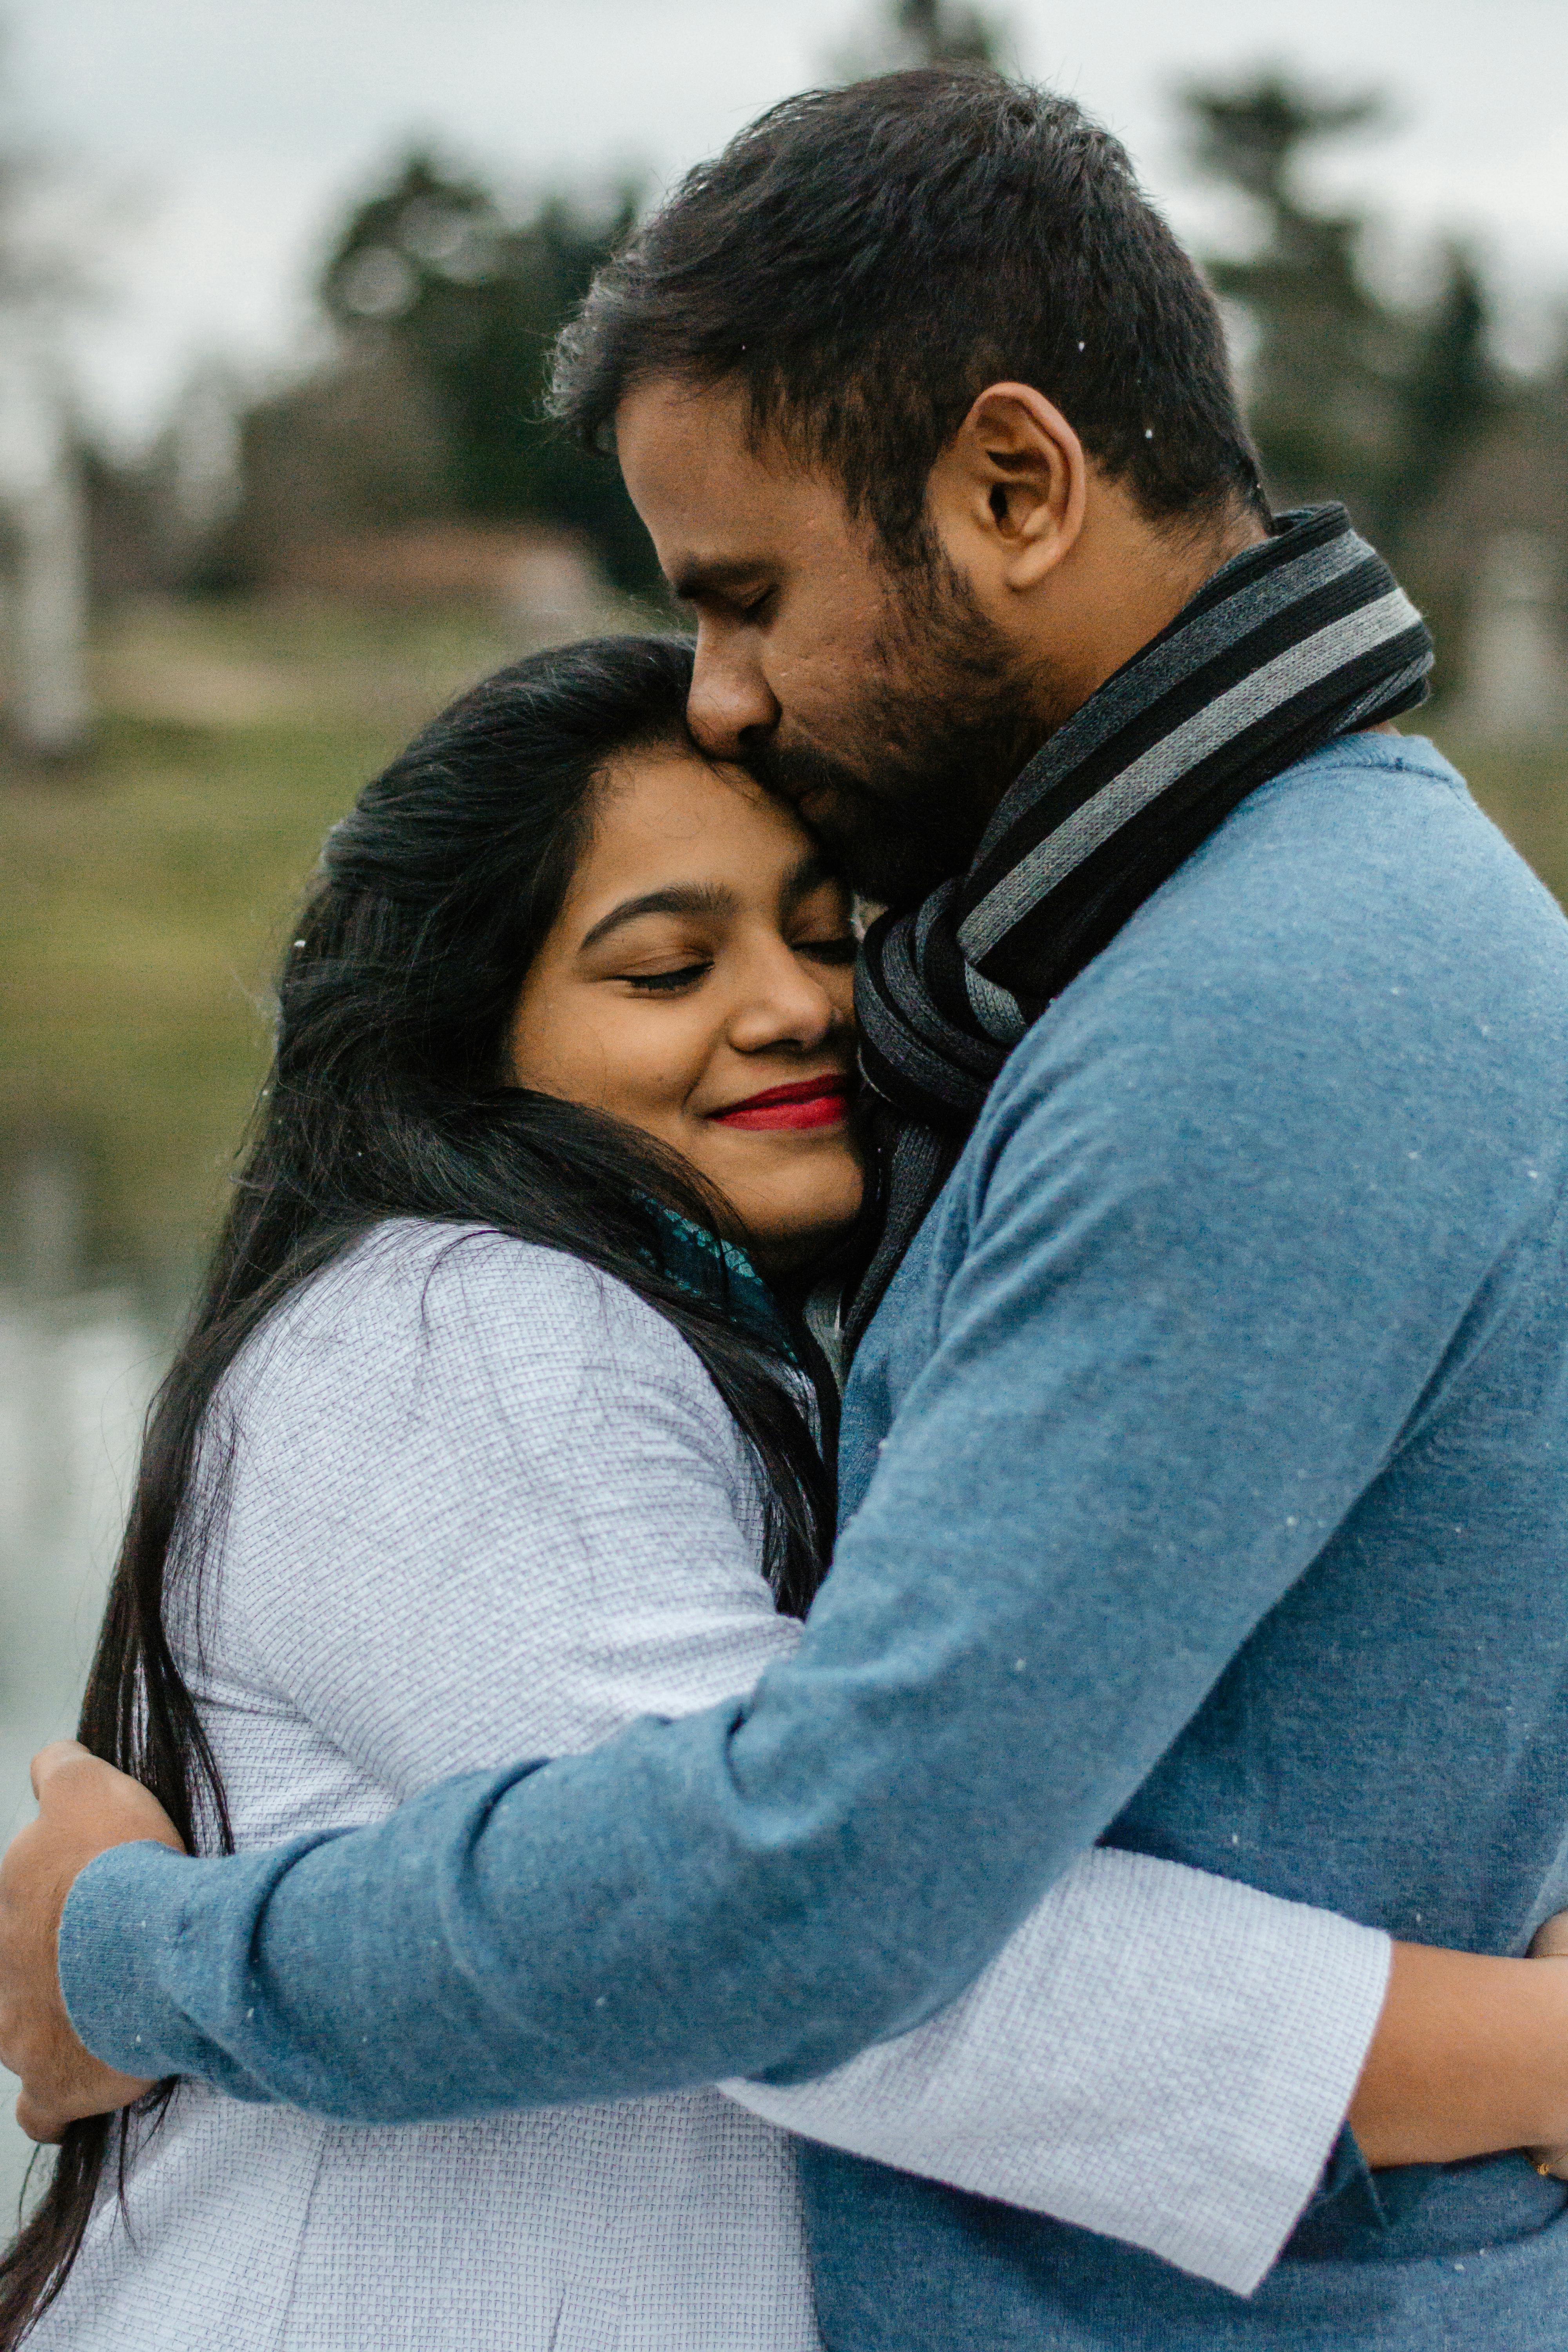 A couple lovingly embracing | Source: Pexels